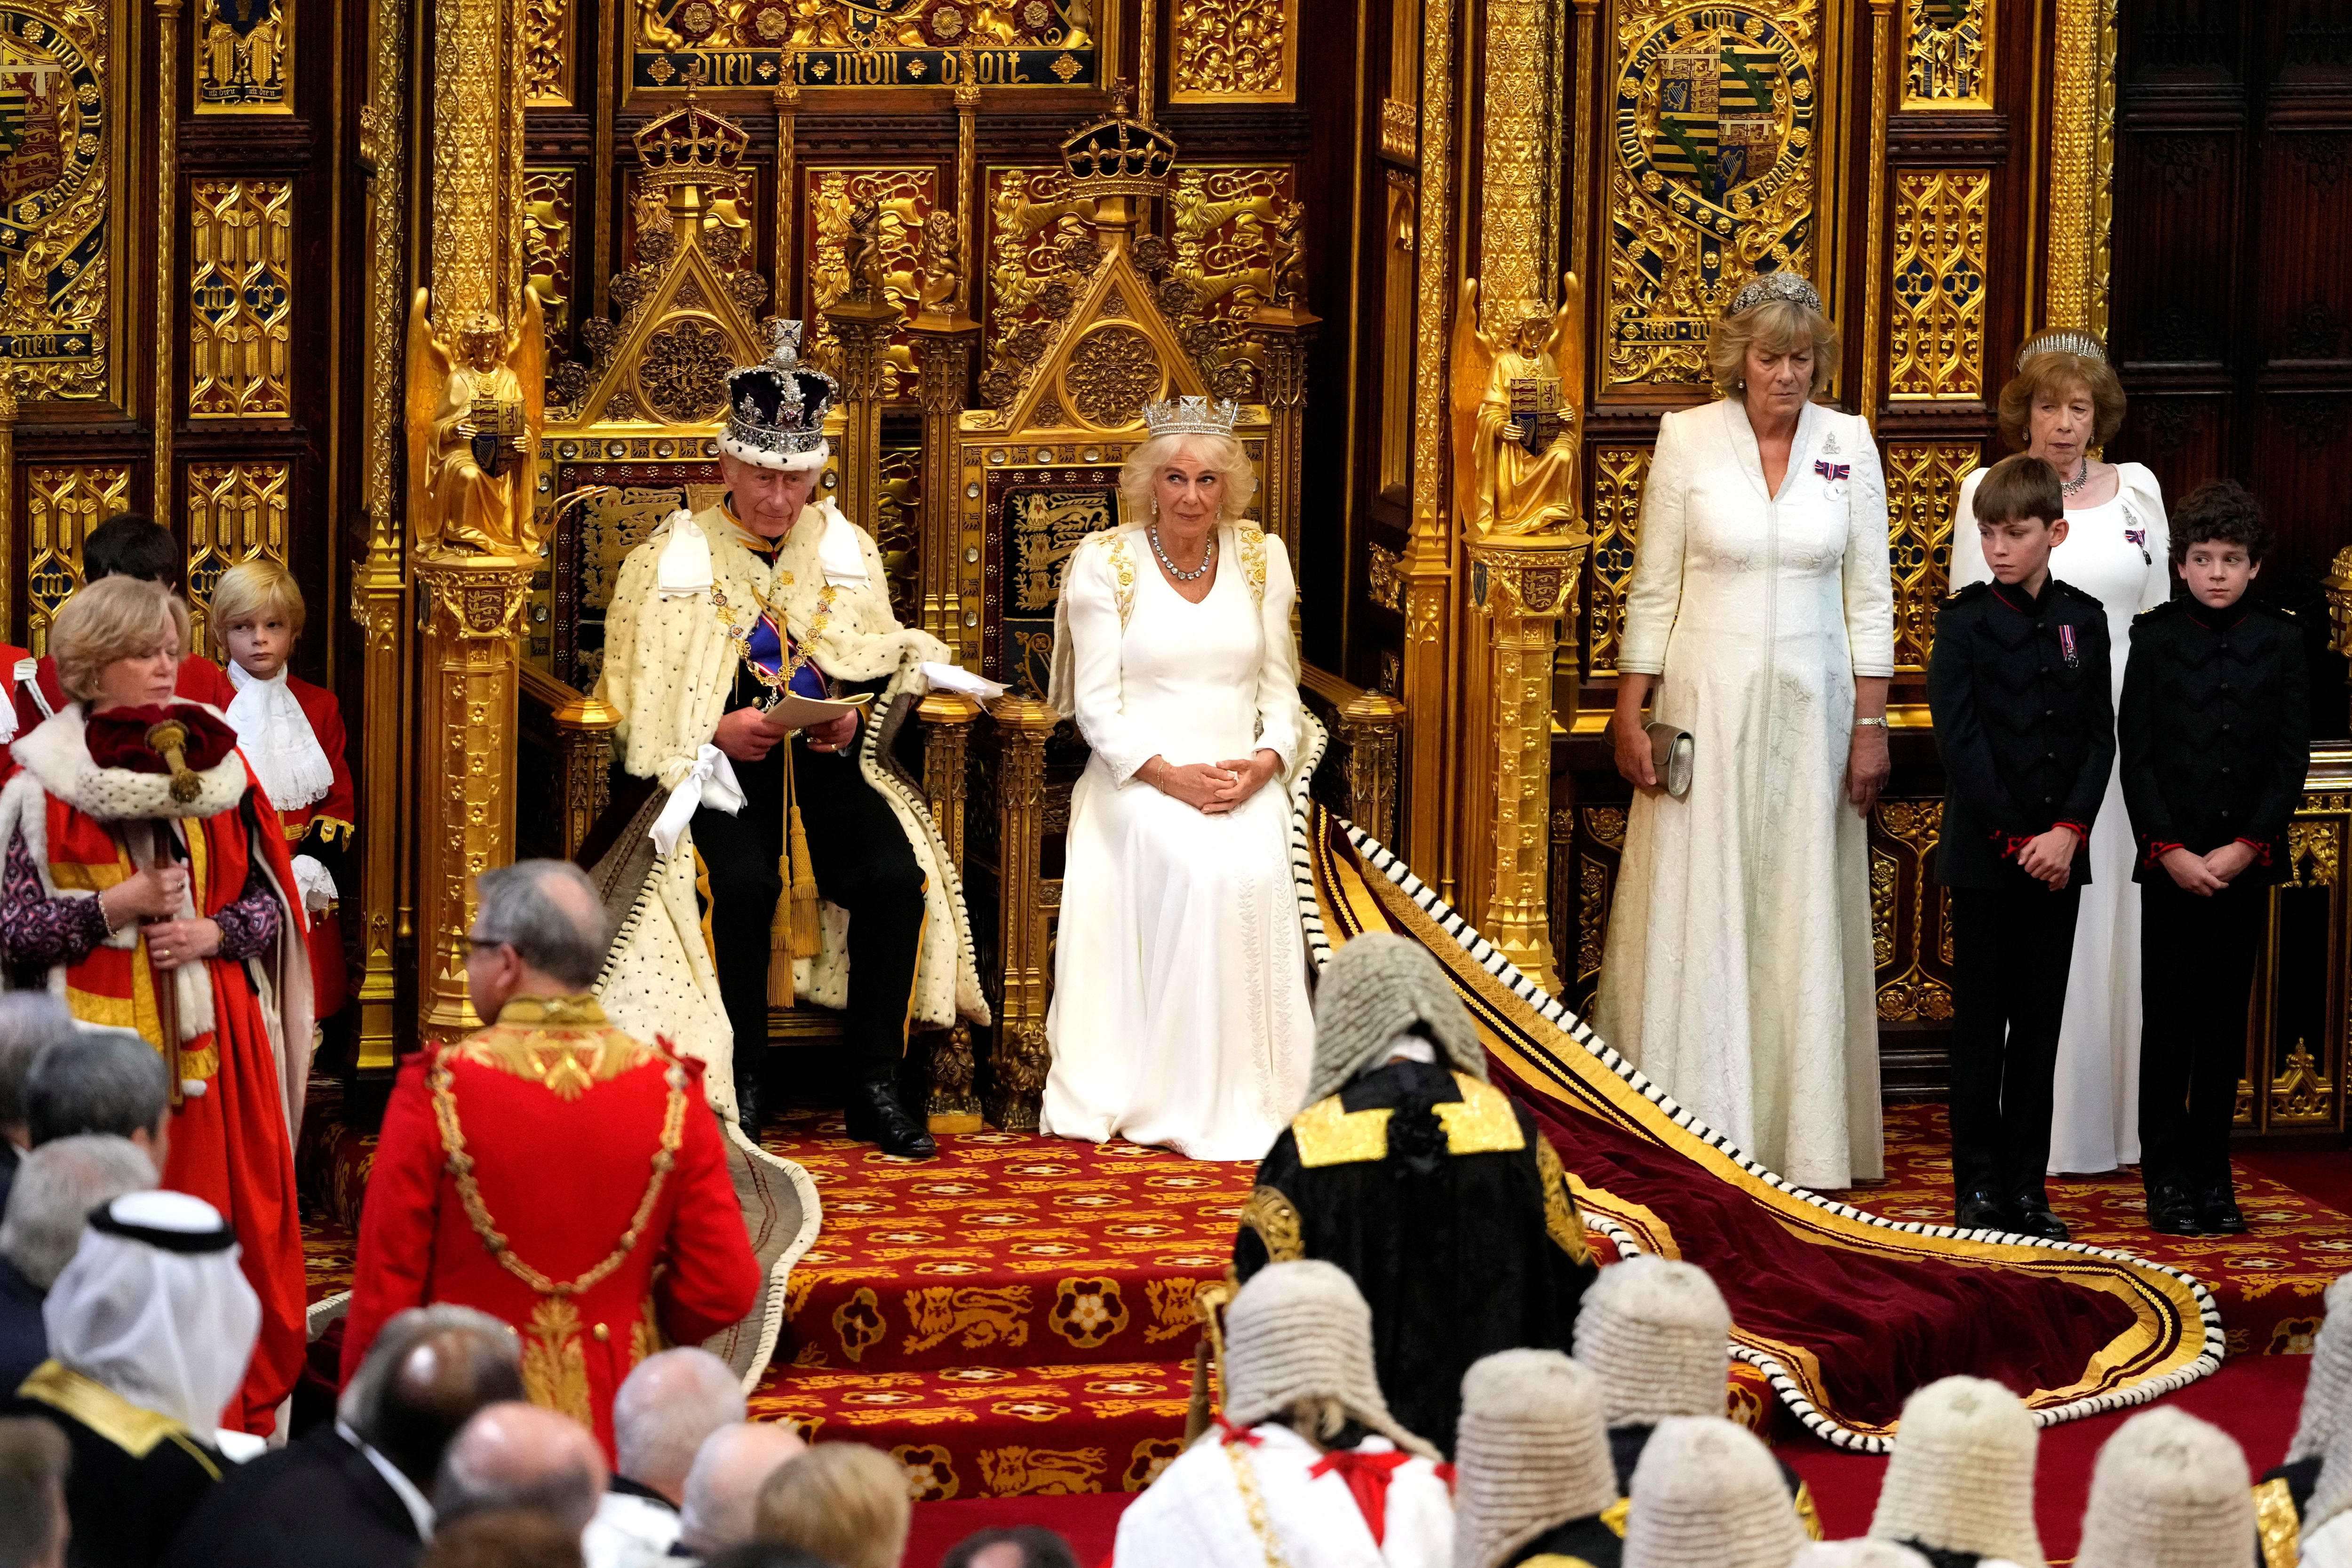 The Opening State of Parliament where the Queen and King are sitting down about to address the people